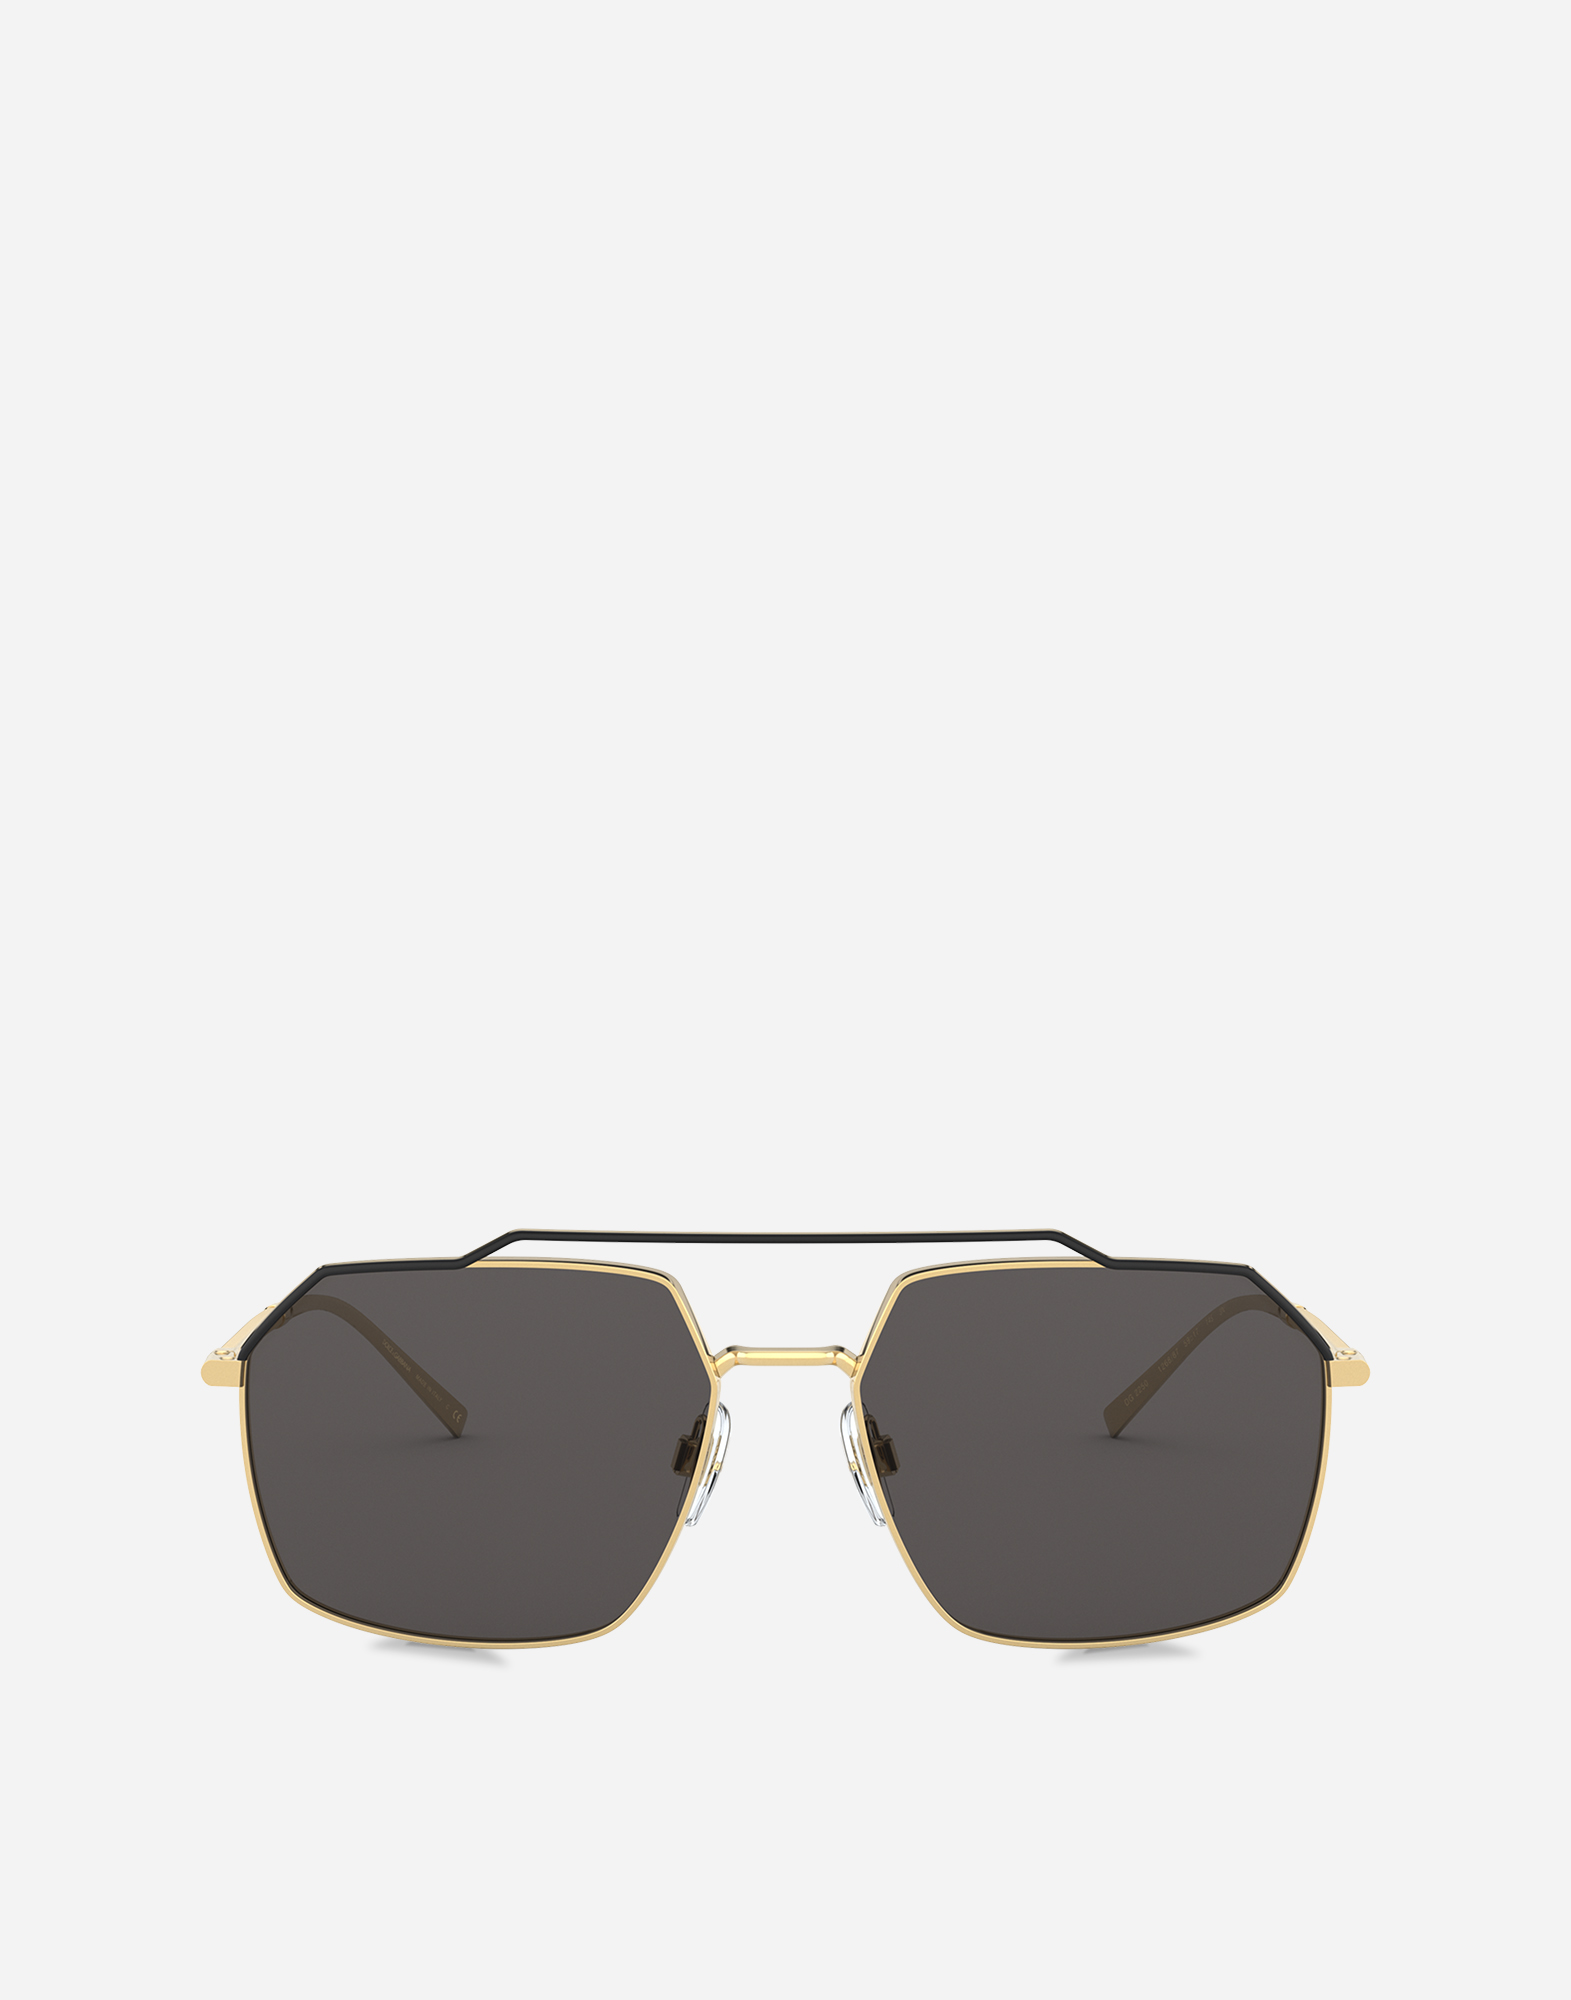 Gros grain sunglasses in Gold and Black